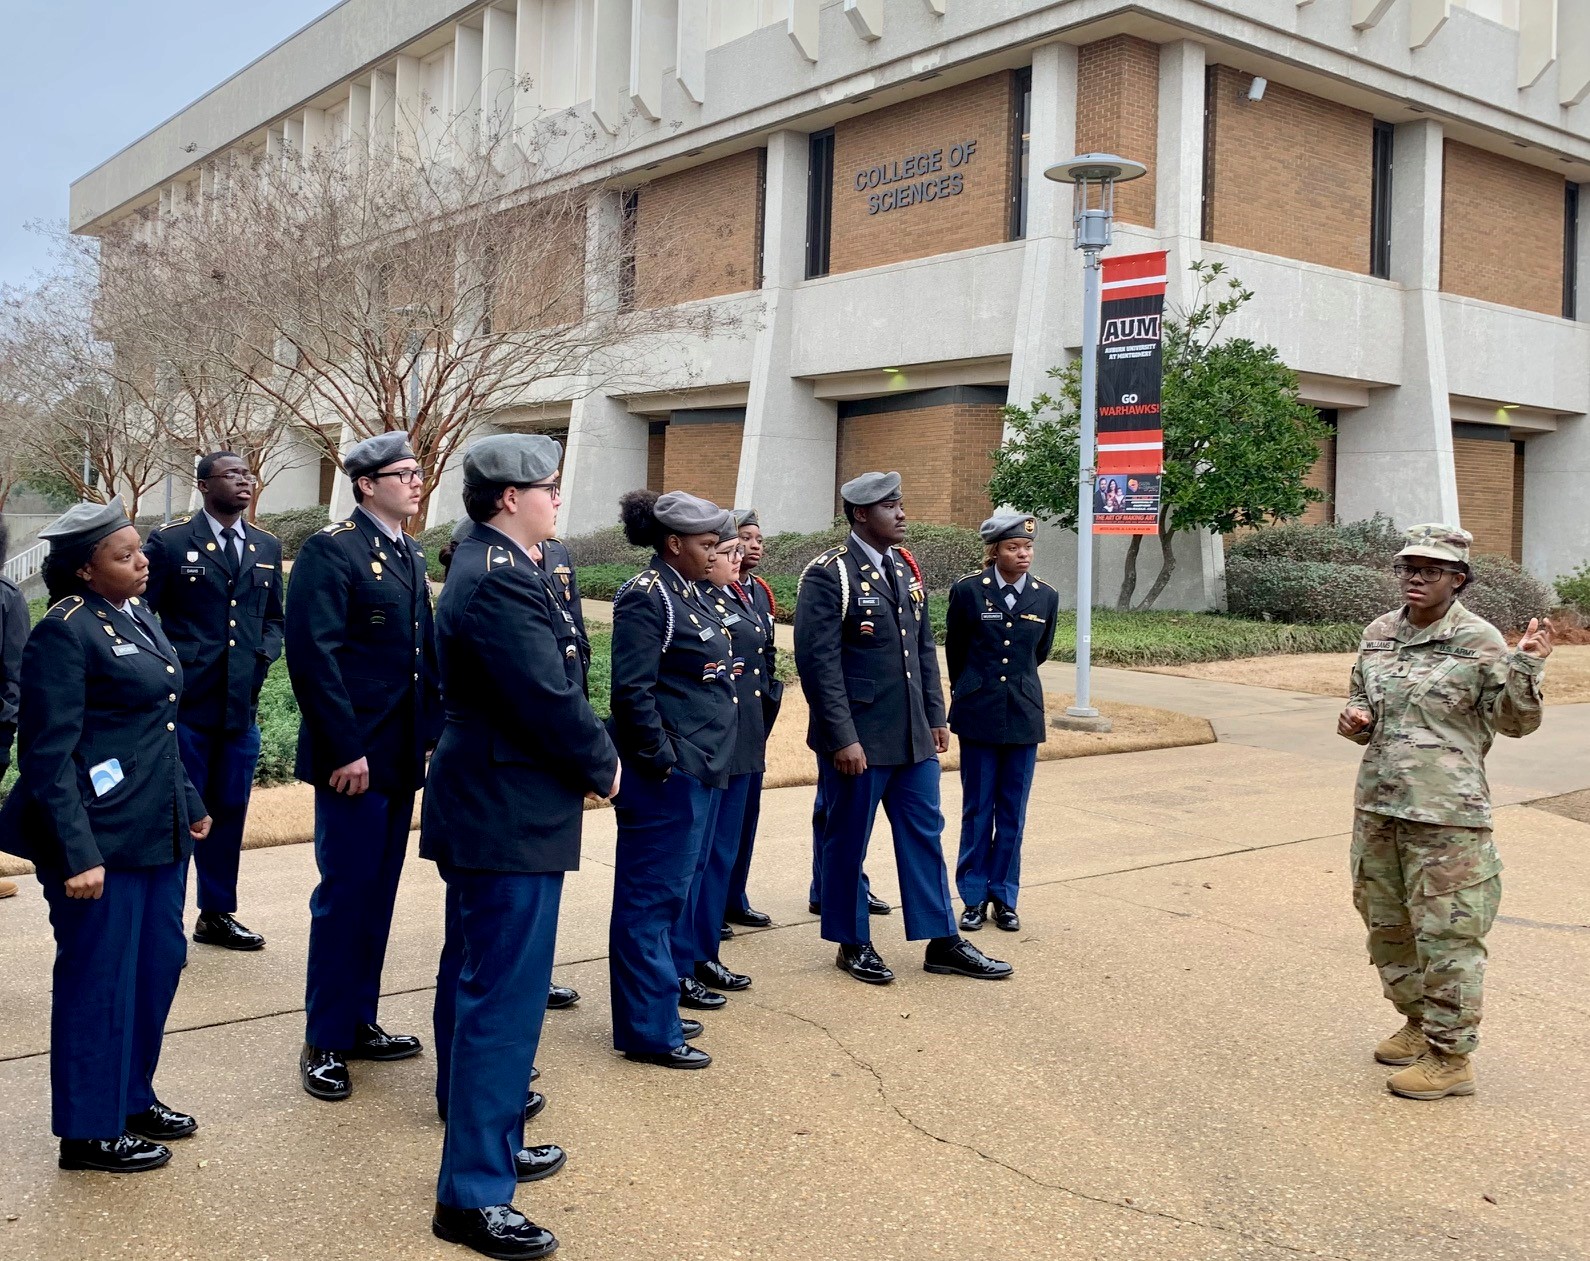 Murphy and Blount JROTC cadets pose for a photo after receiving a tour of AUM campus by the ROTC Mustang Battalion Executive Officer Cadet Williams in Montgomery, Alabama.